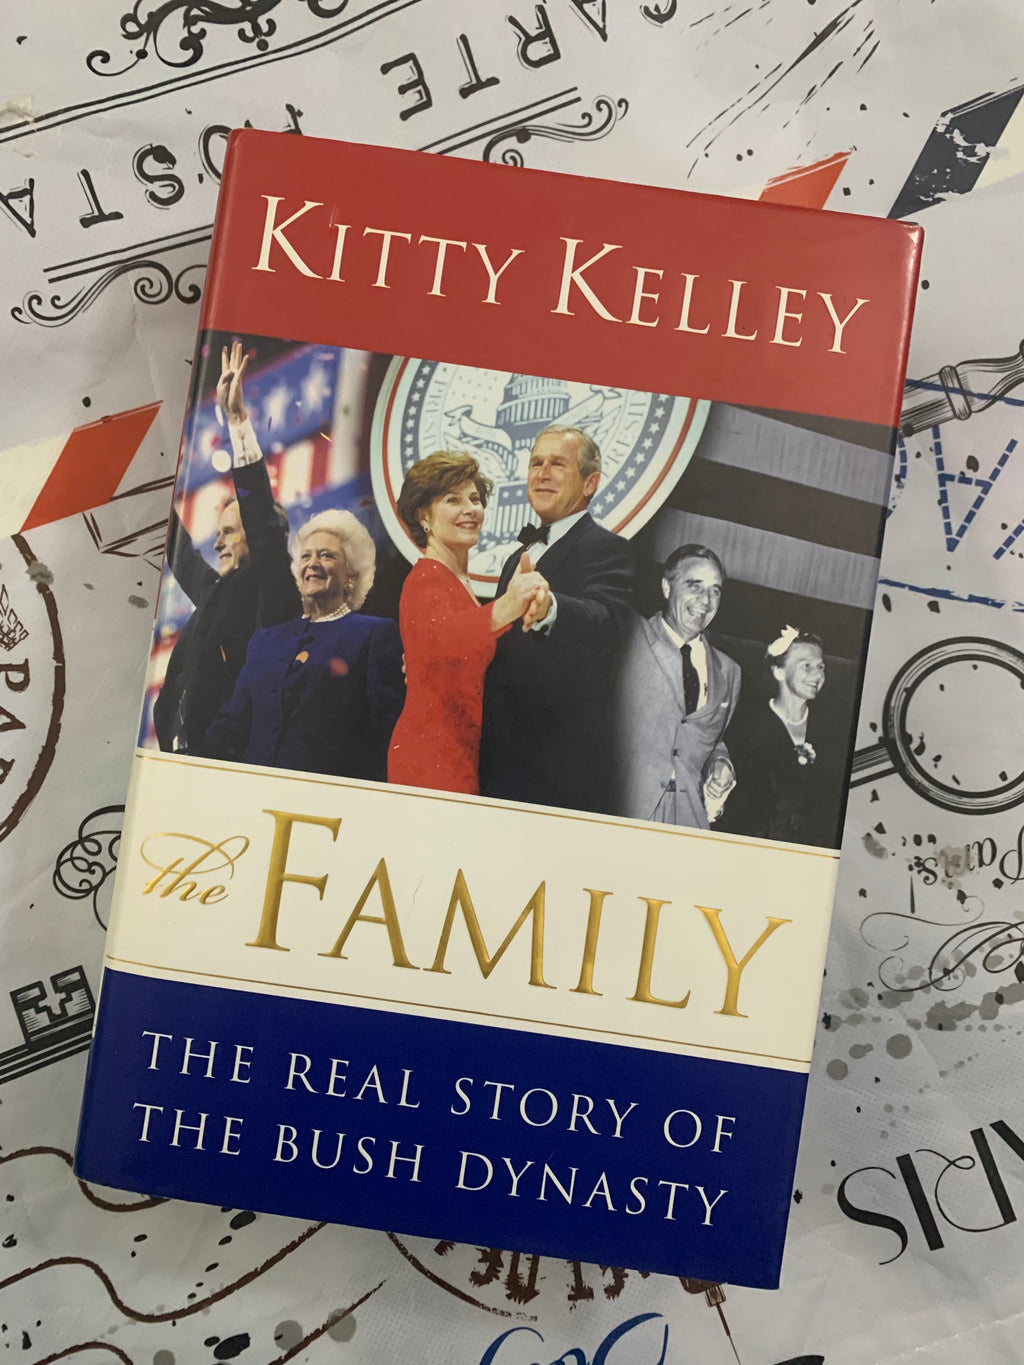 The Family: The Real Story of the Bush Dynasty- By Kitty Kelley